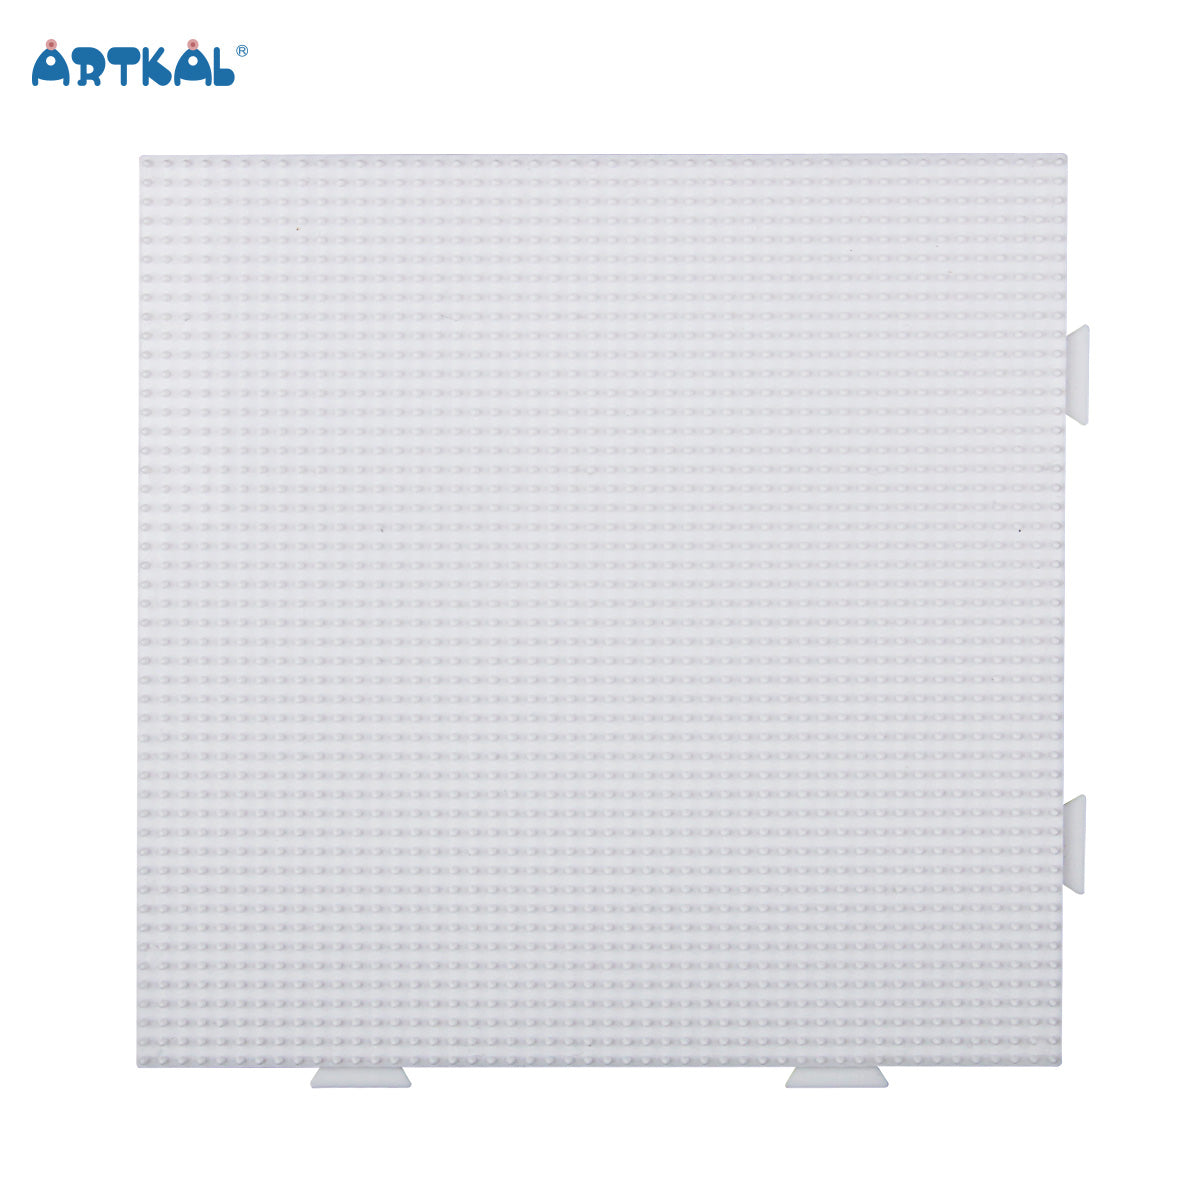 Artkal Large Square Pegboard for Mini 2.6mm Iron Beads – Official